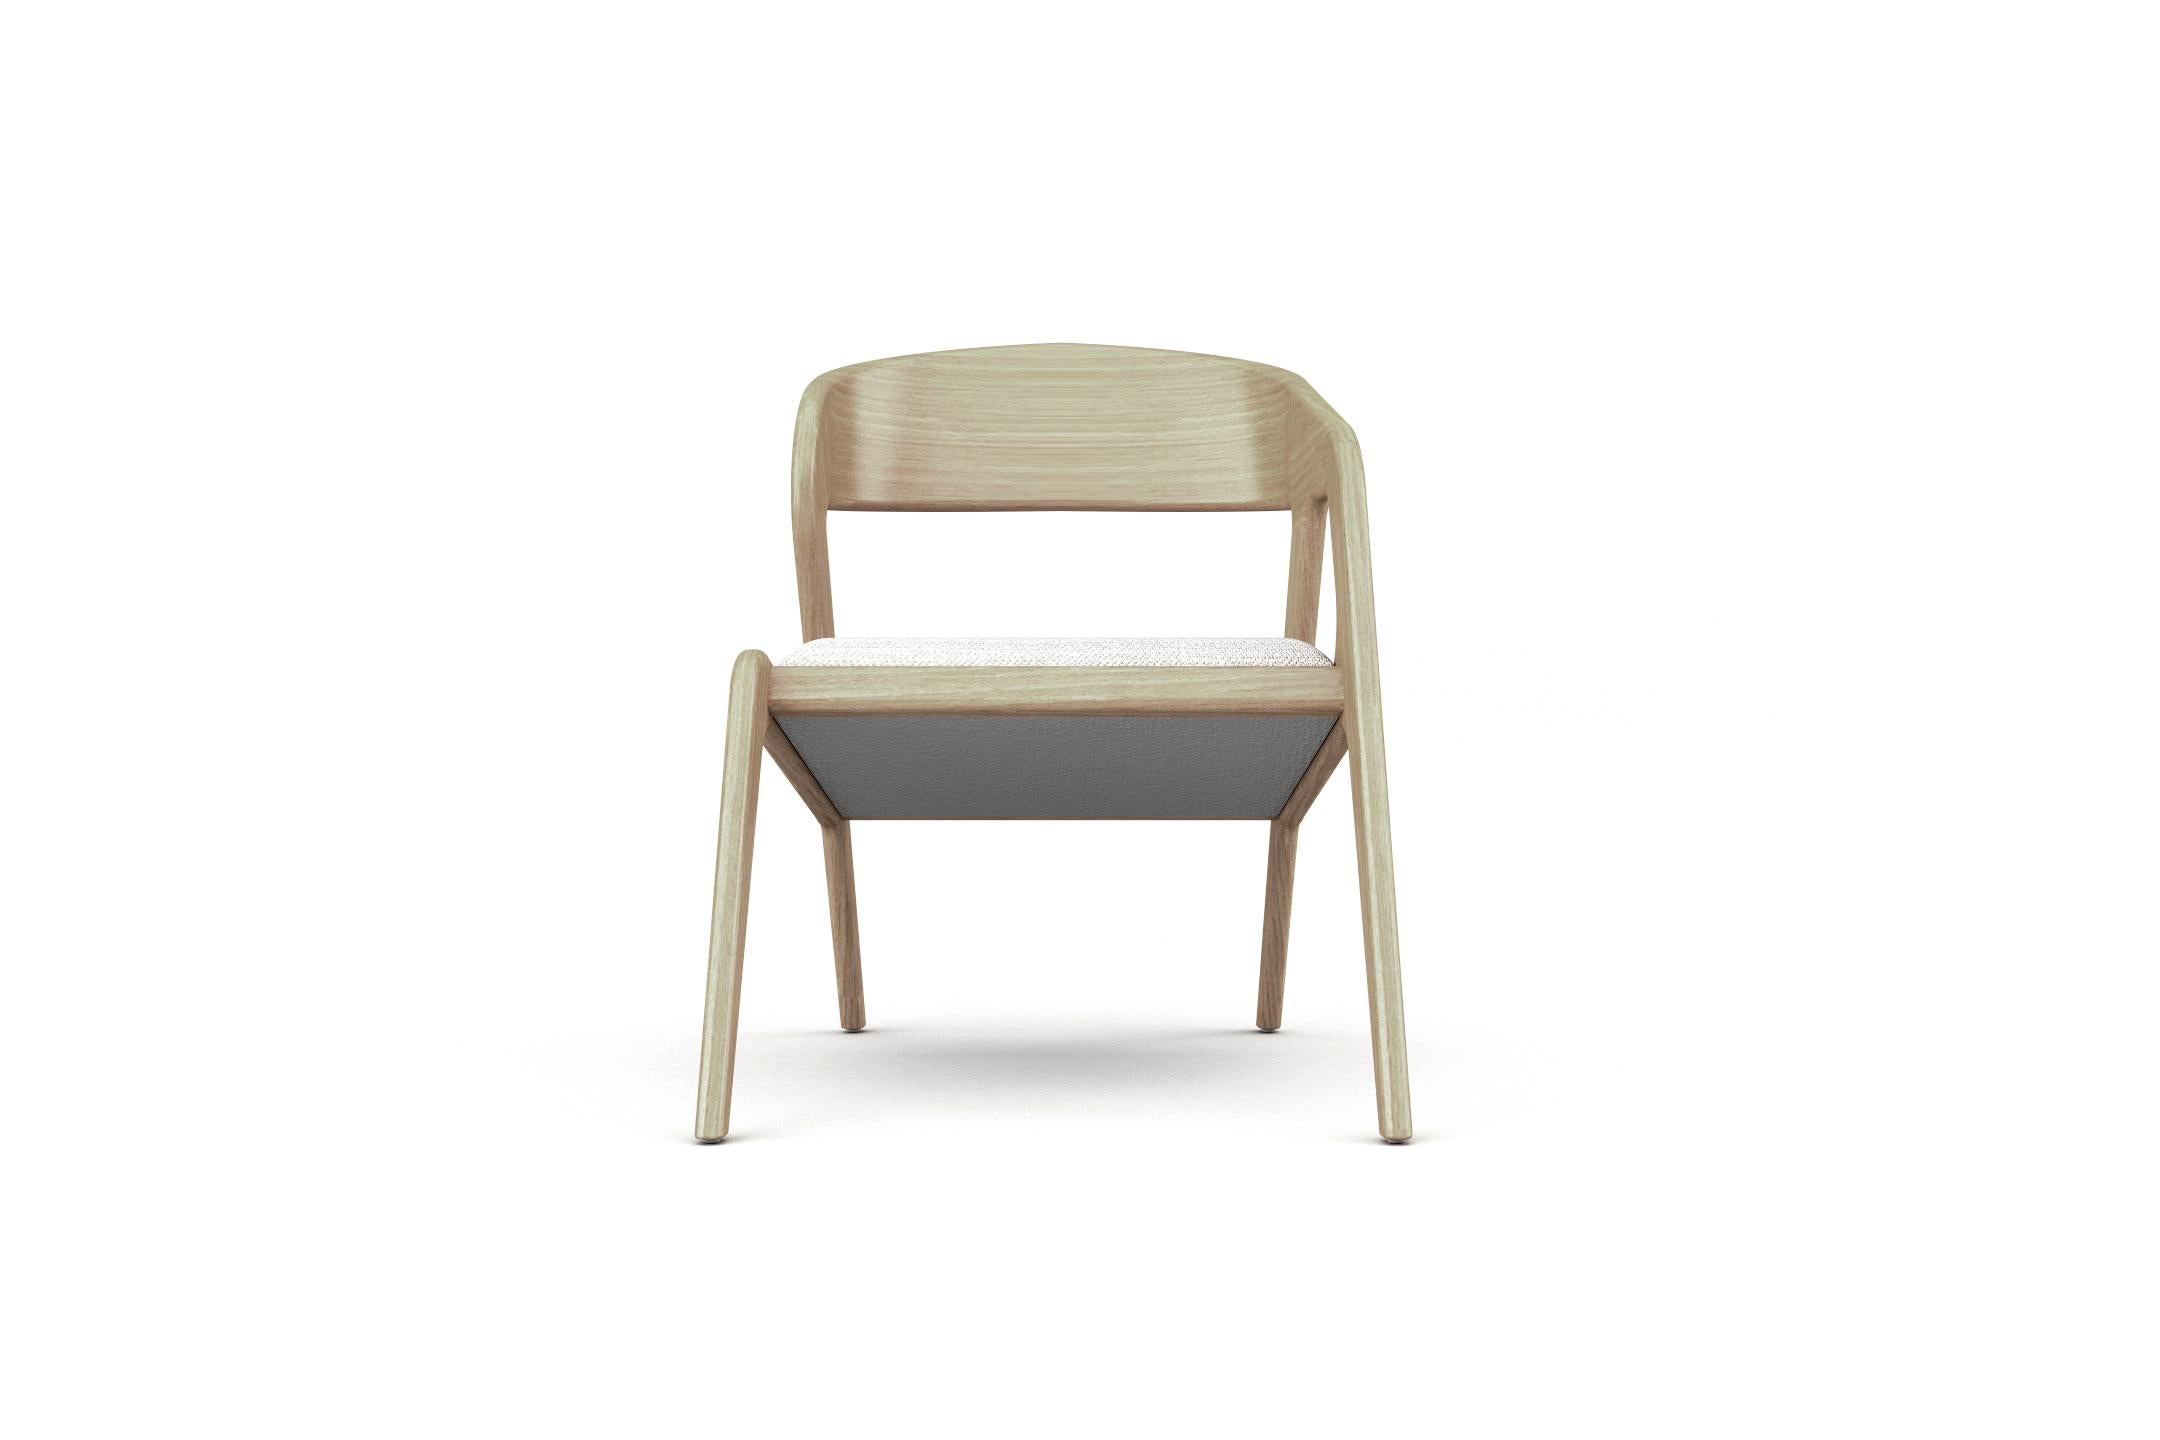 European Seville Armchair, Modern and Minimalistic Oak Armchair with Upholstered Seat For Sale